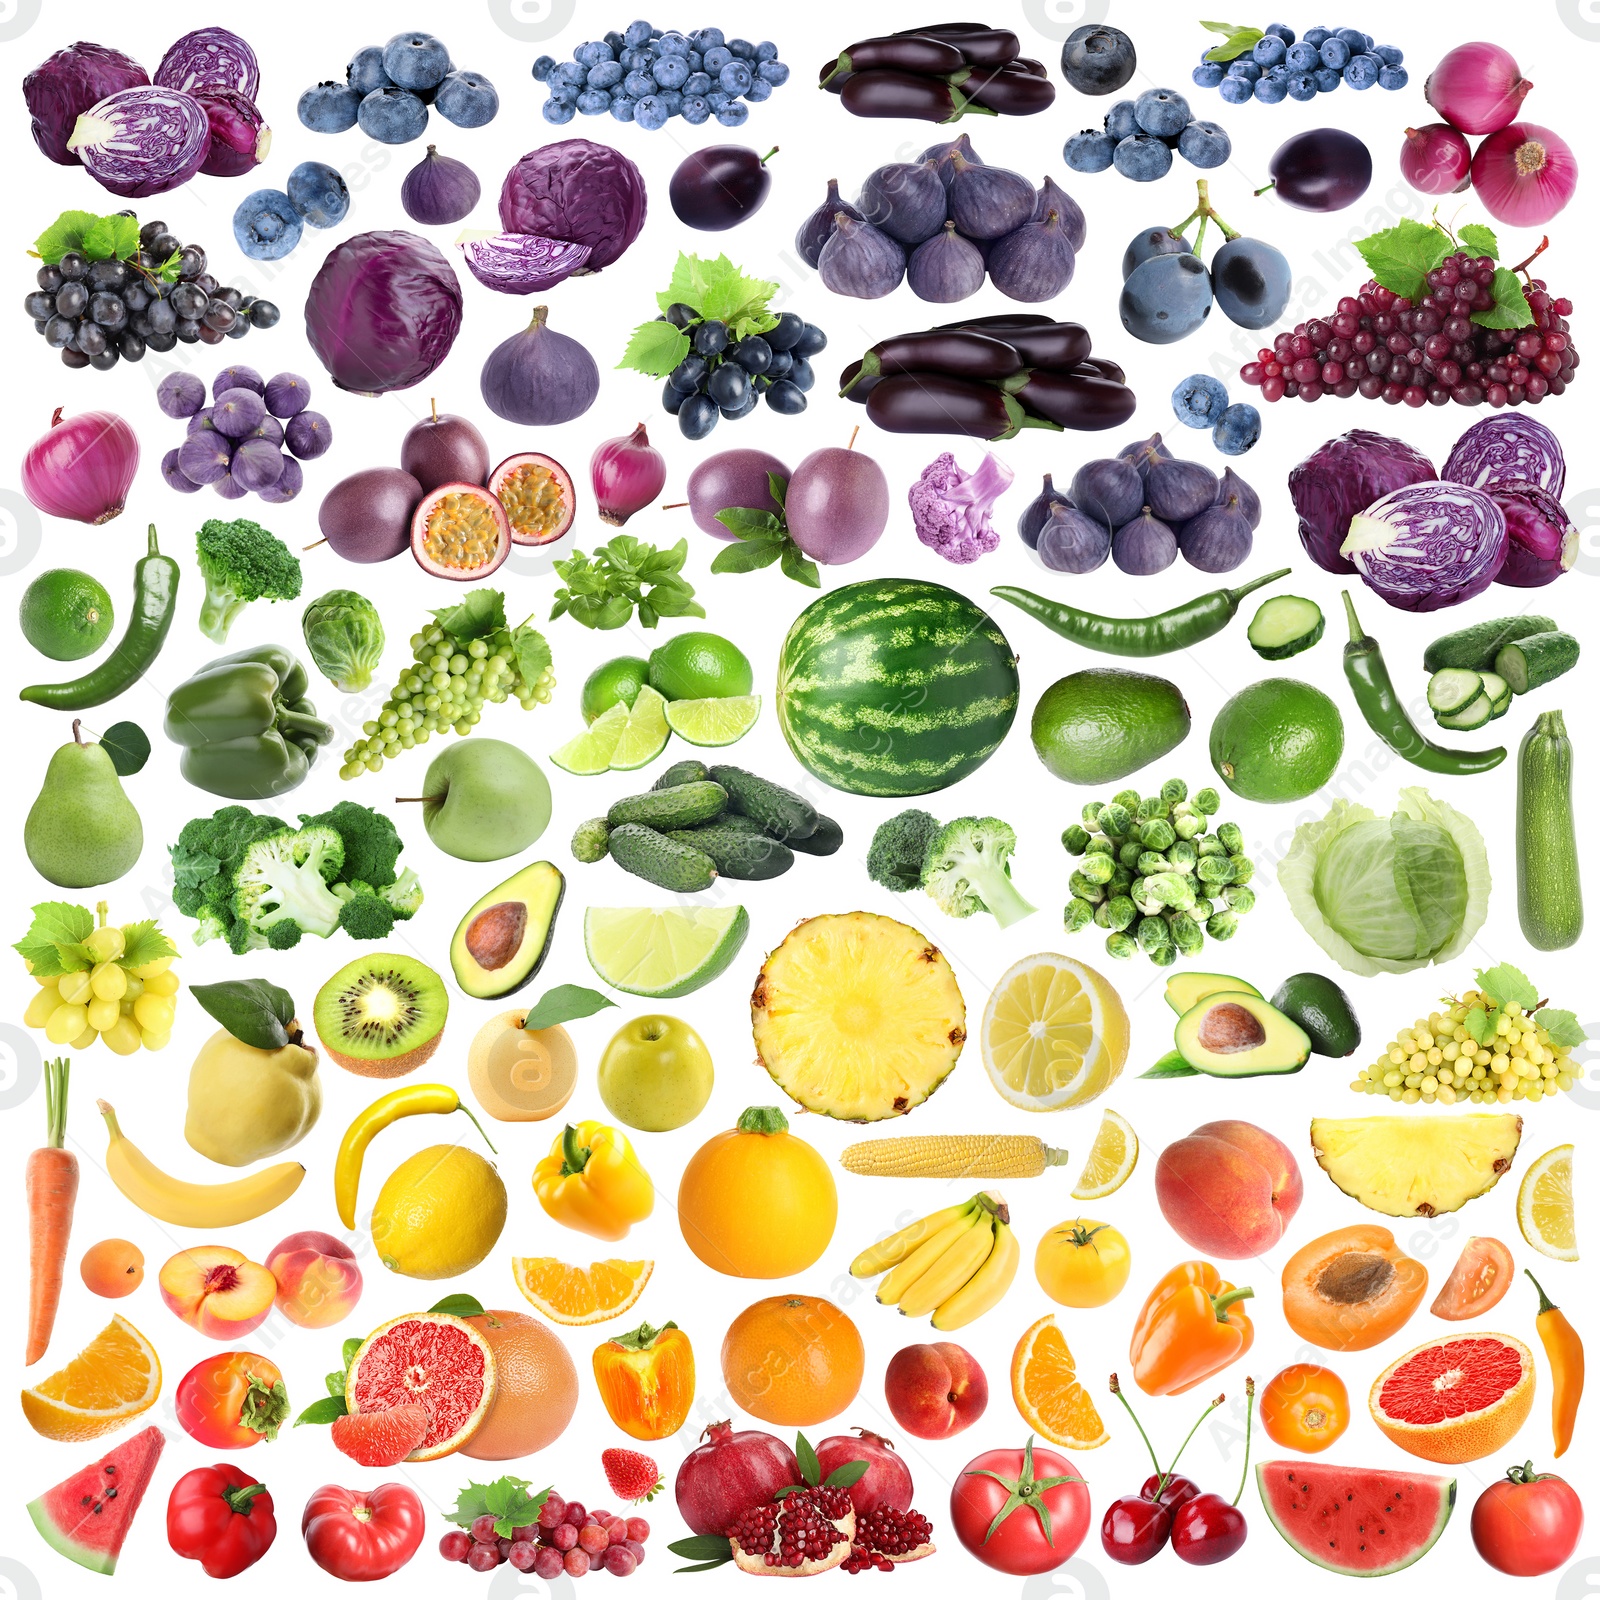 Image of Many fresh fruits and vegetables arranged in rainbow colors on white background, collage